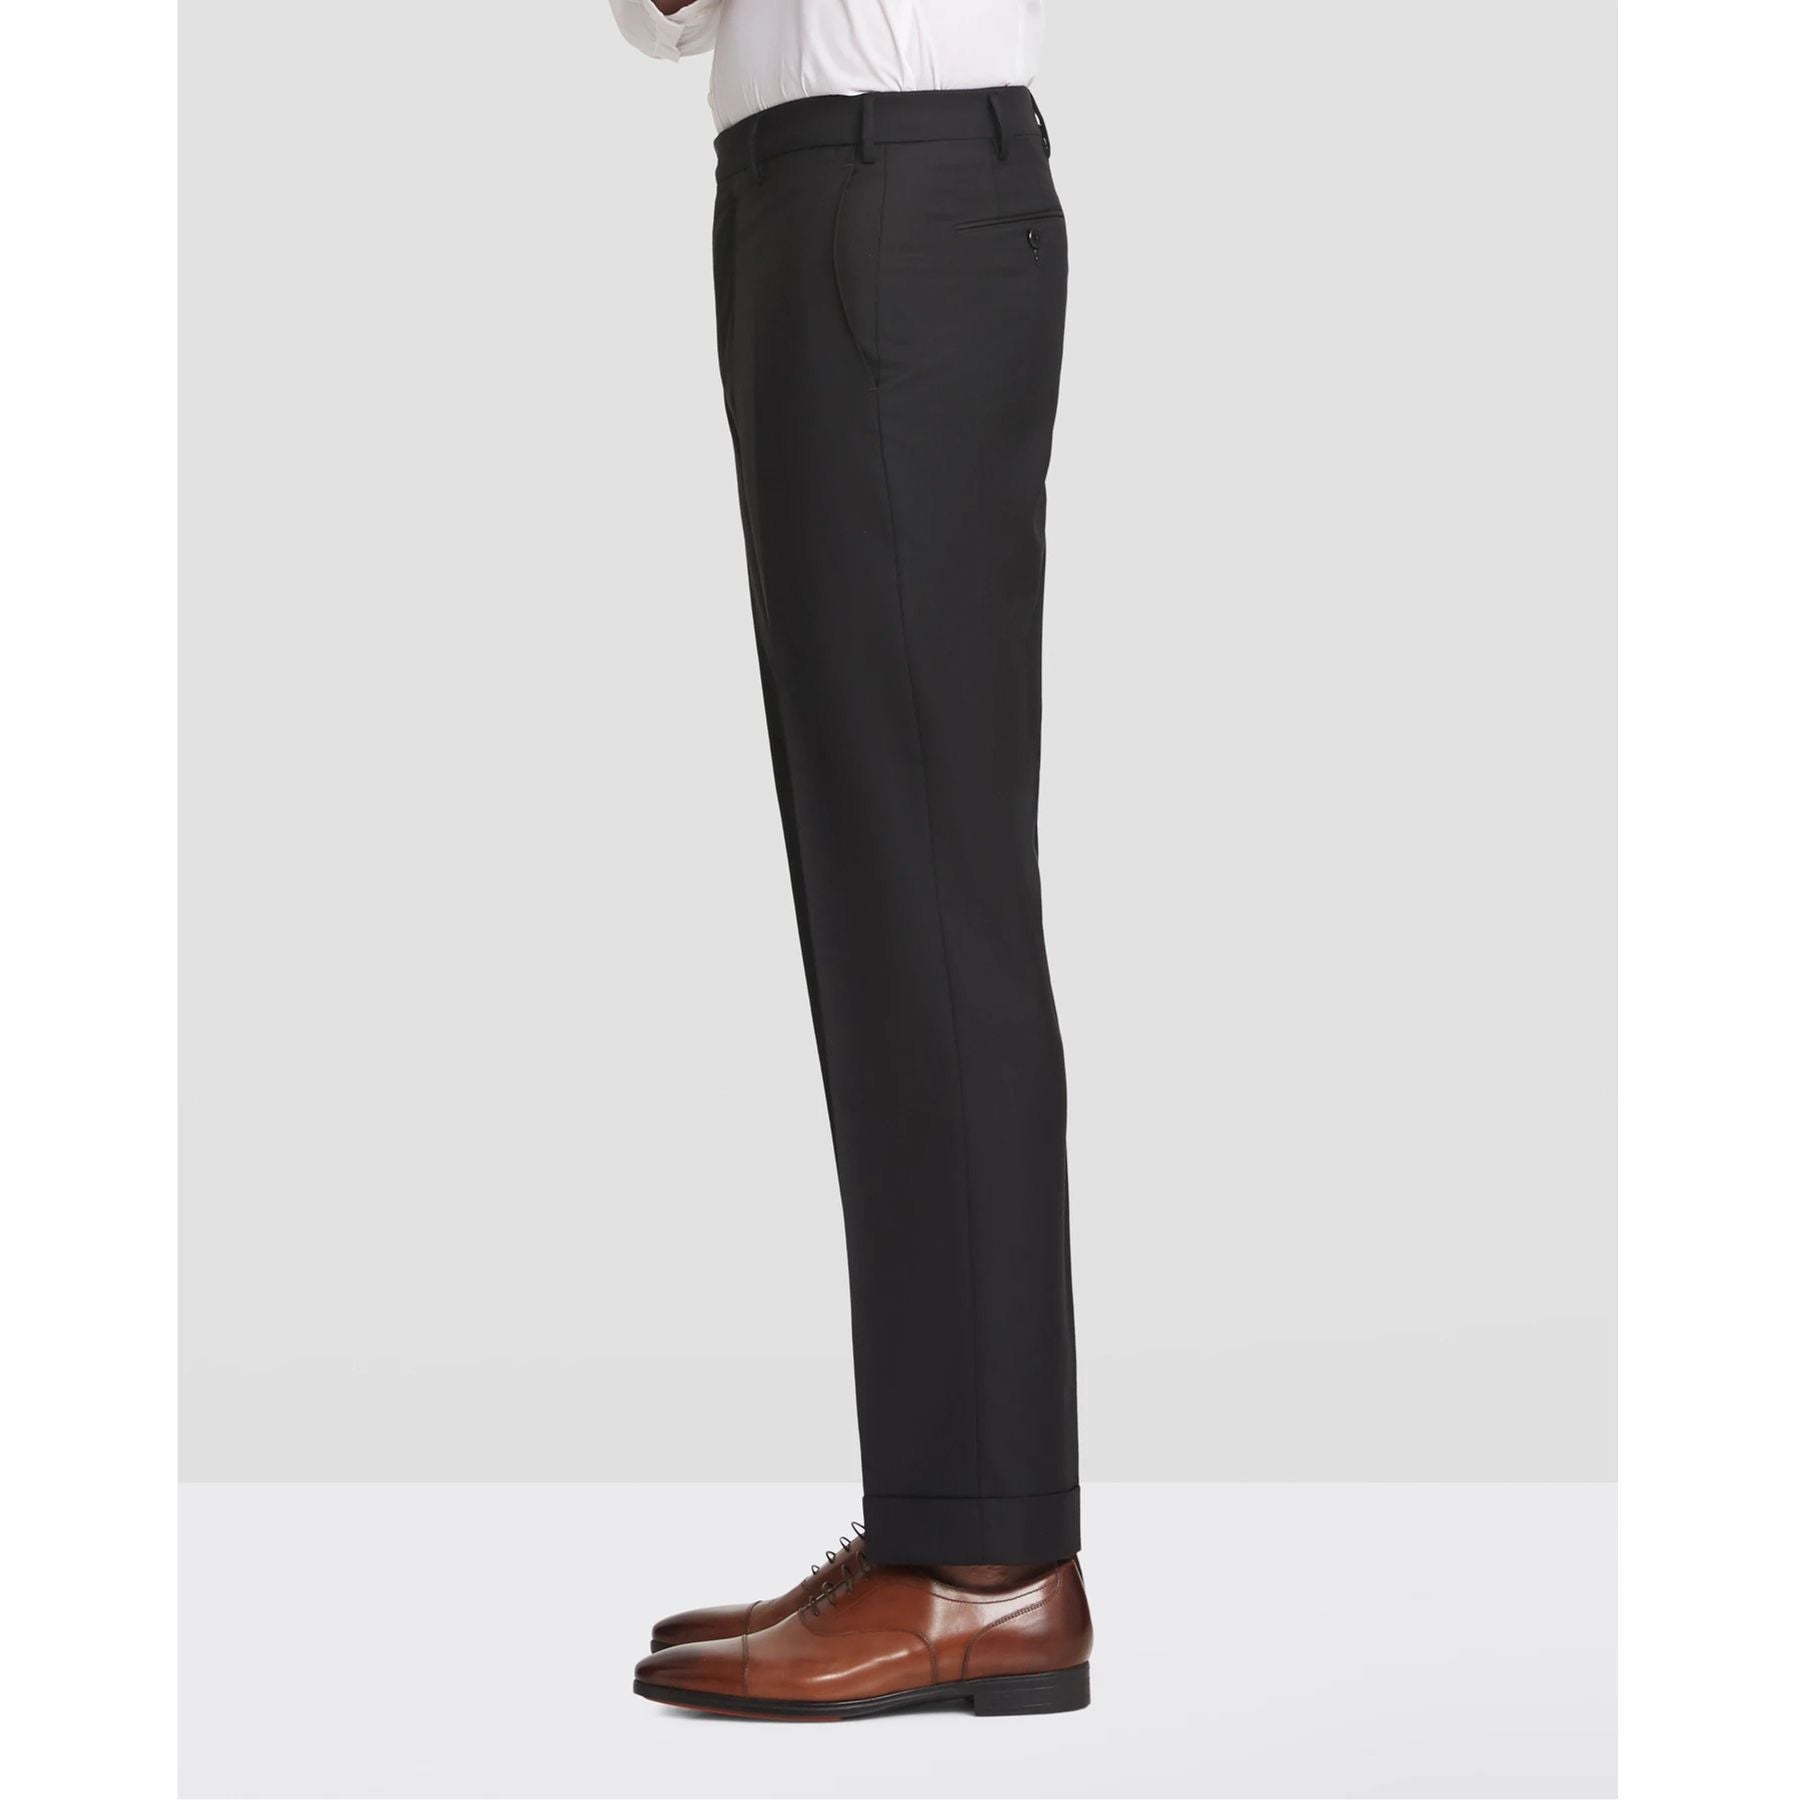 Parker Flat Front Stretch Wool Trouser in Black (Modern Straight Fit) by Zanella